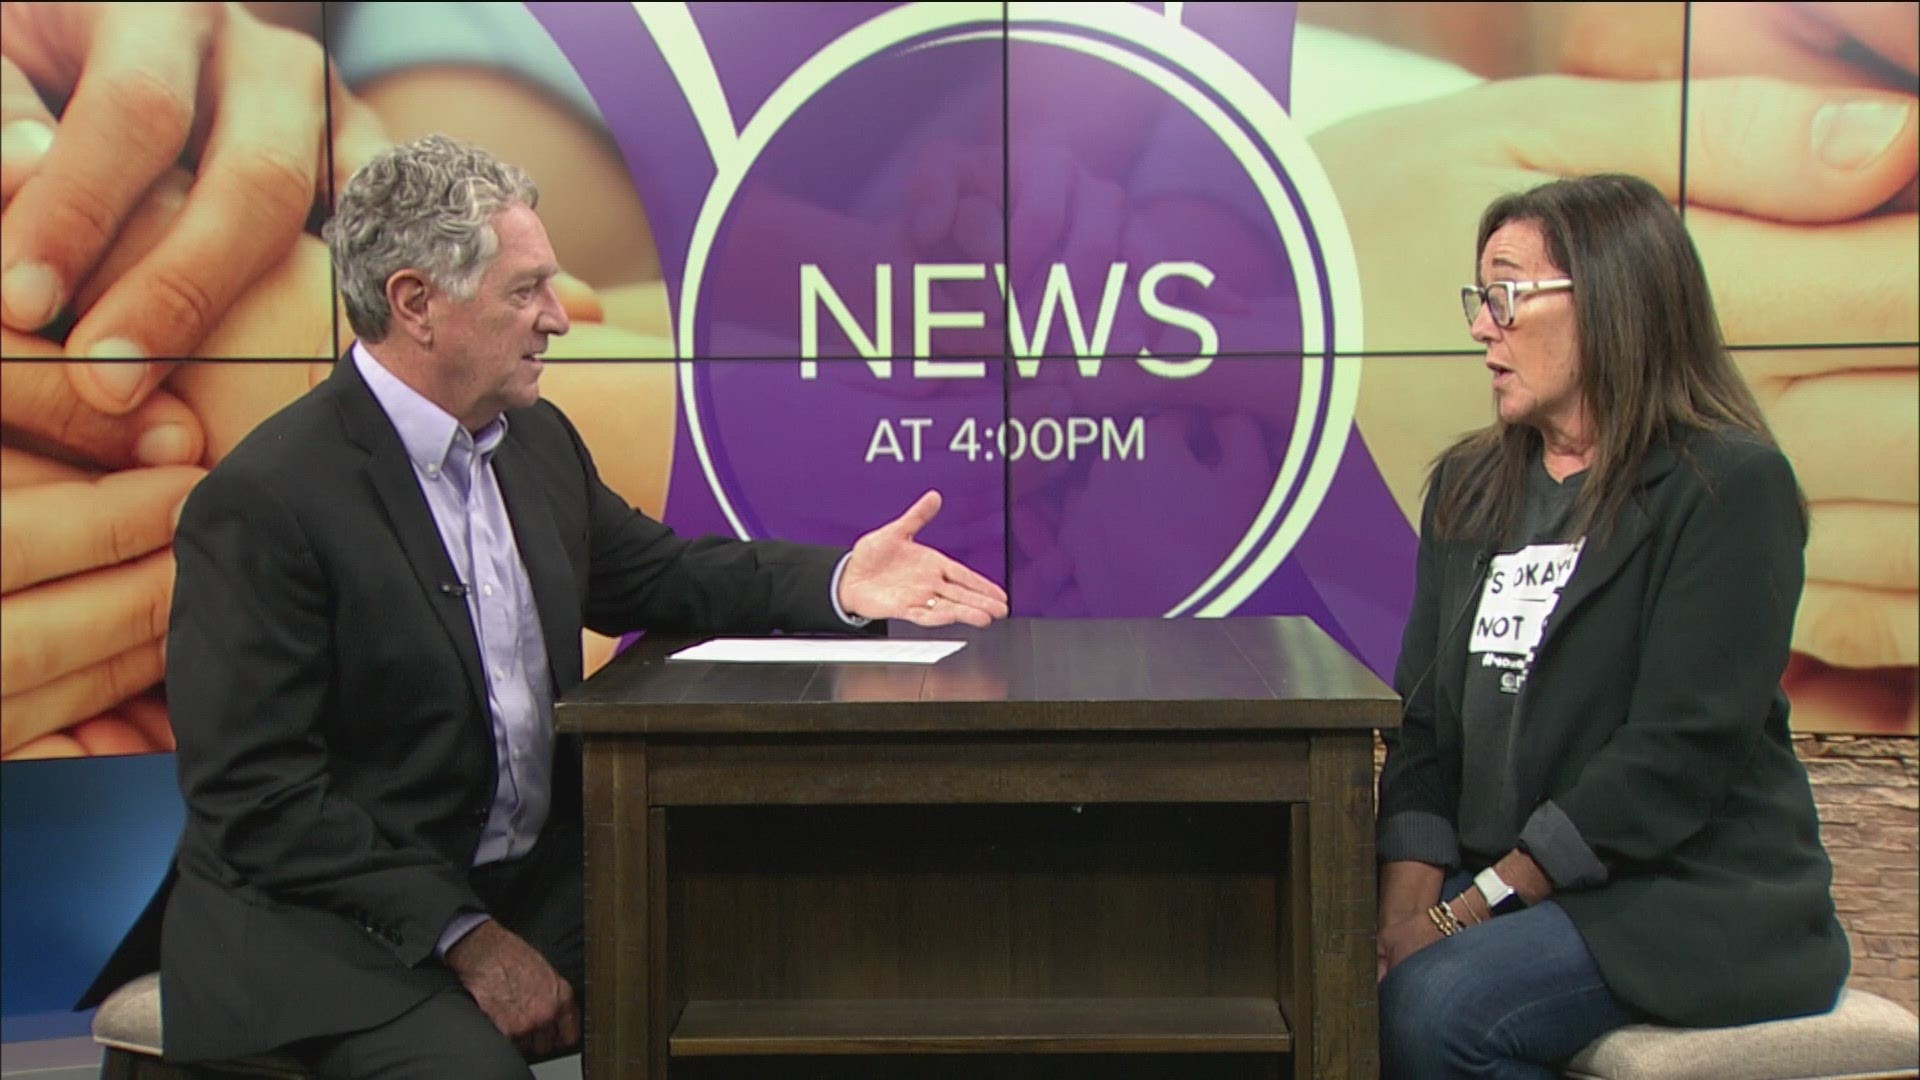 Robin Isenberg, of NAMI of Greater Toledo, talked with Dan Cummins about Mental Health Awareness Month.